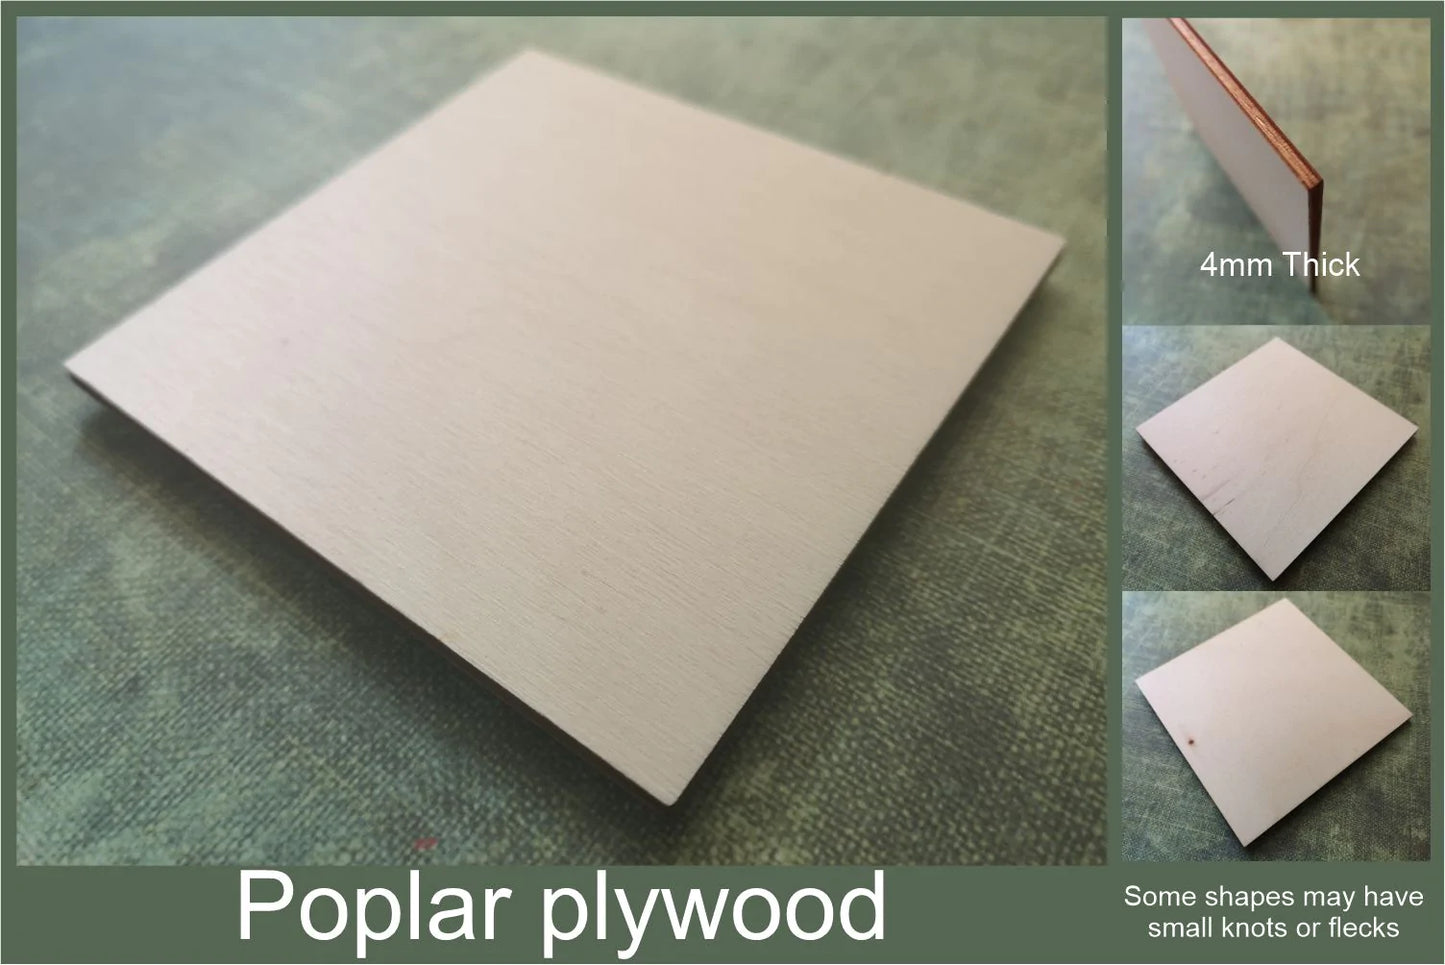 4mm thick poplar plywood used to make the Door hanger with hook cut-outs ready for crafting